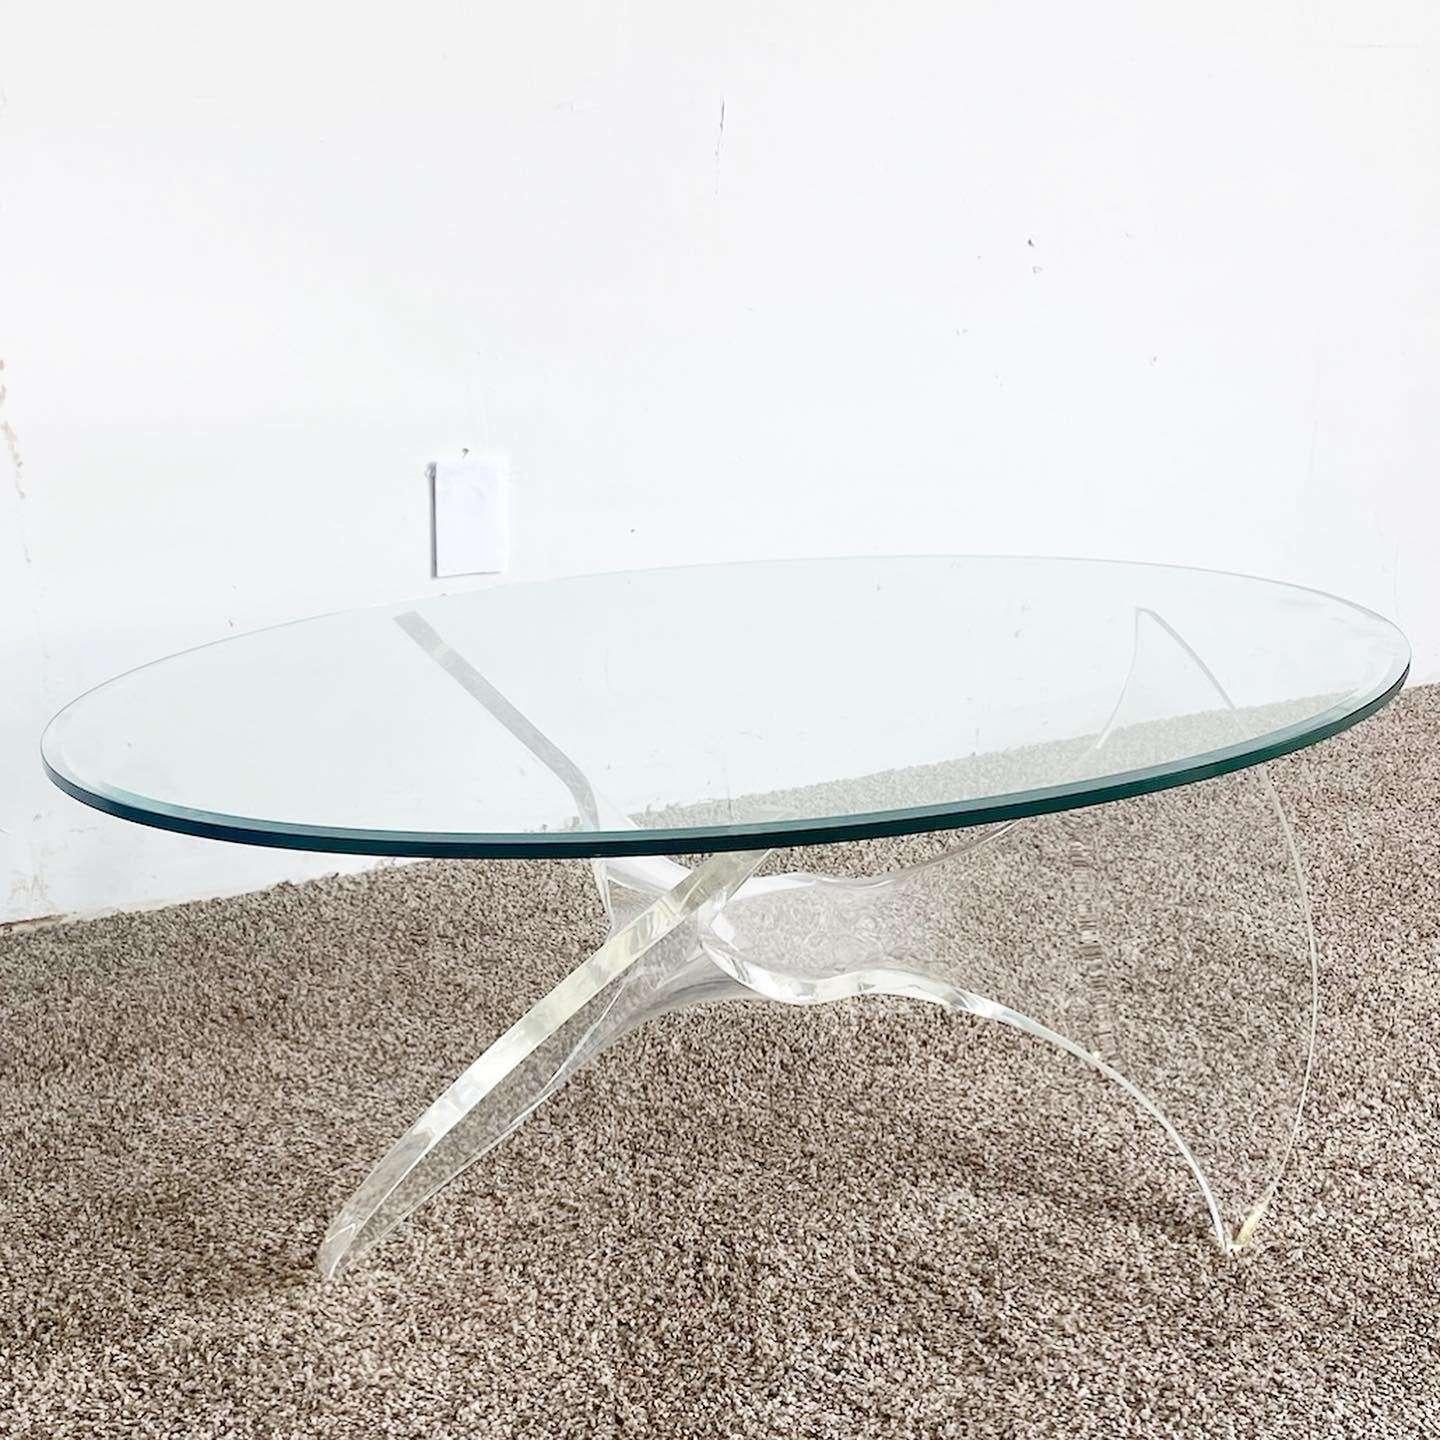 Incredible vintage mid century modern oval glass top lucite coffee table. The vase of this table displays a fantastic sculpted shape which holds up the glass on the three prongs.